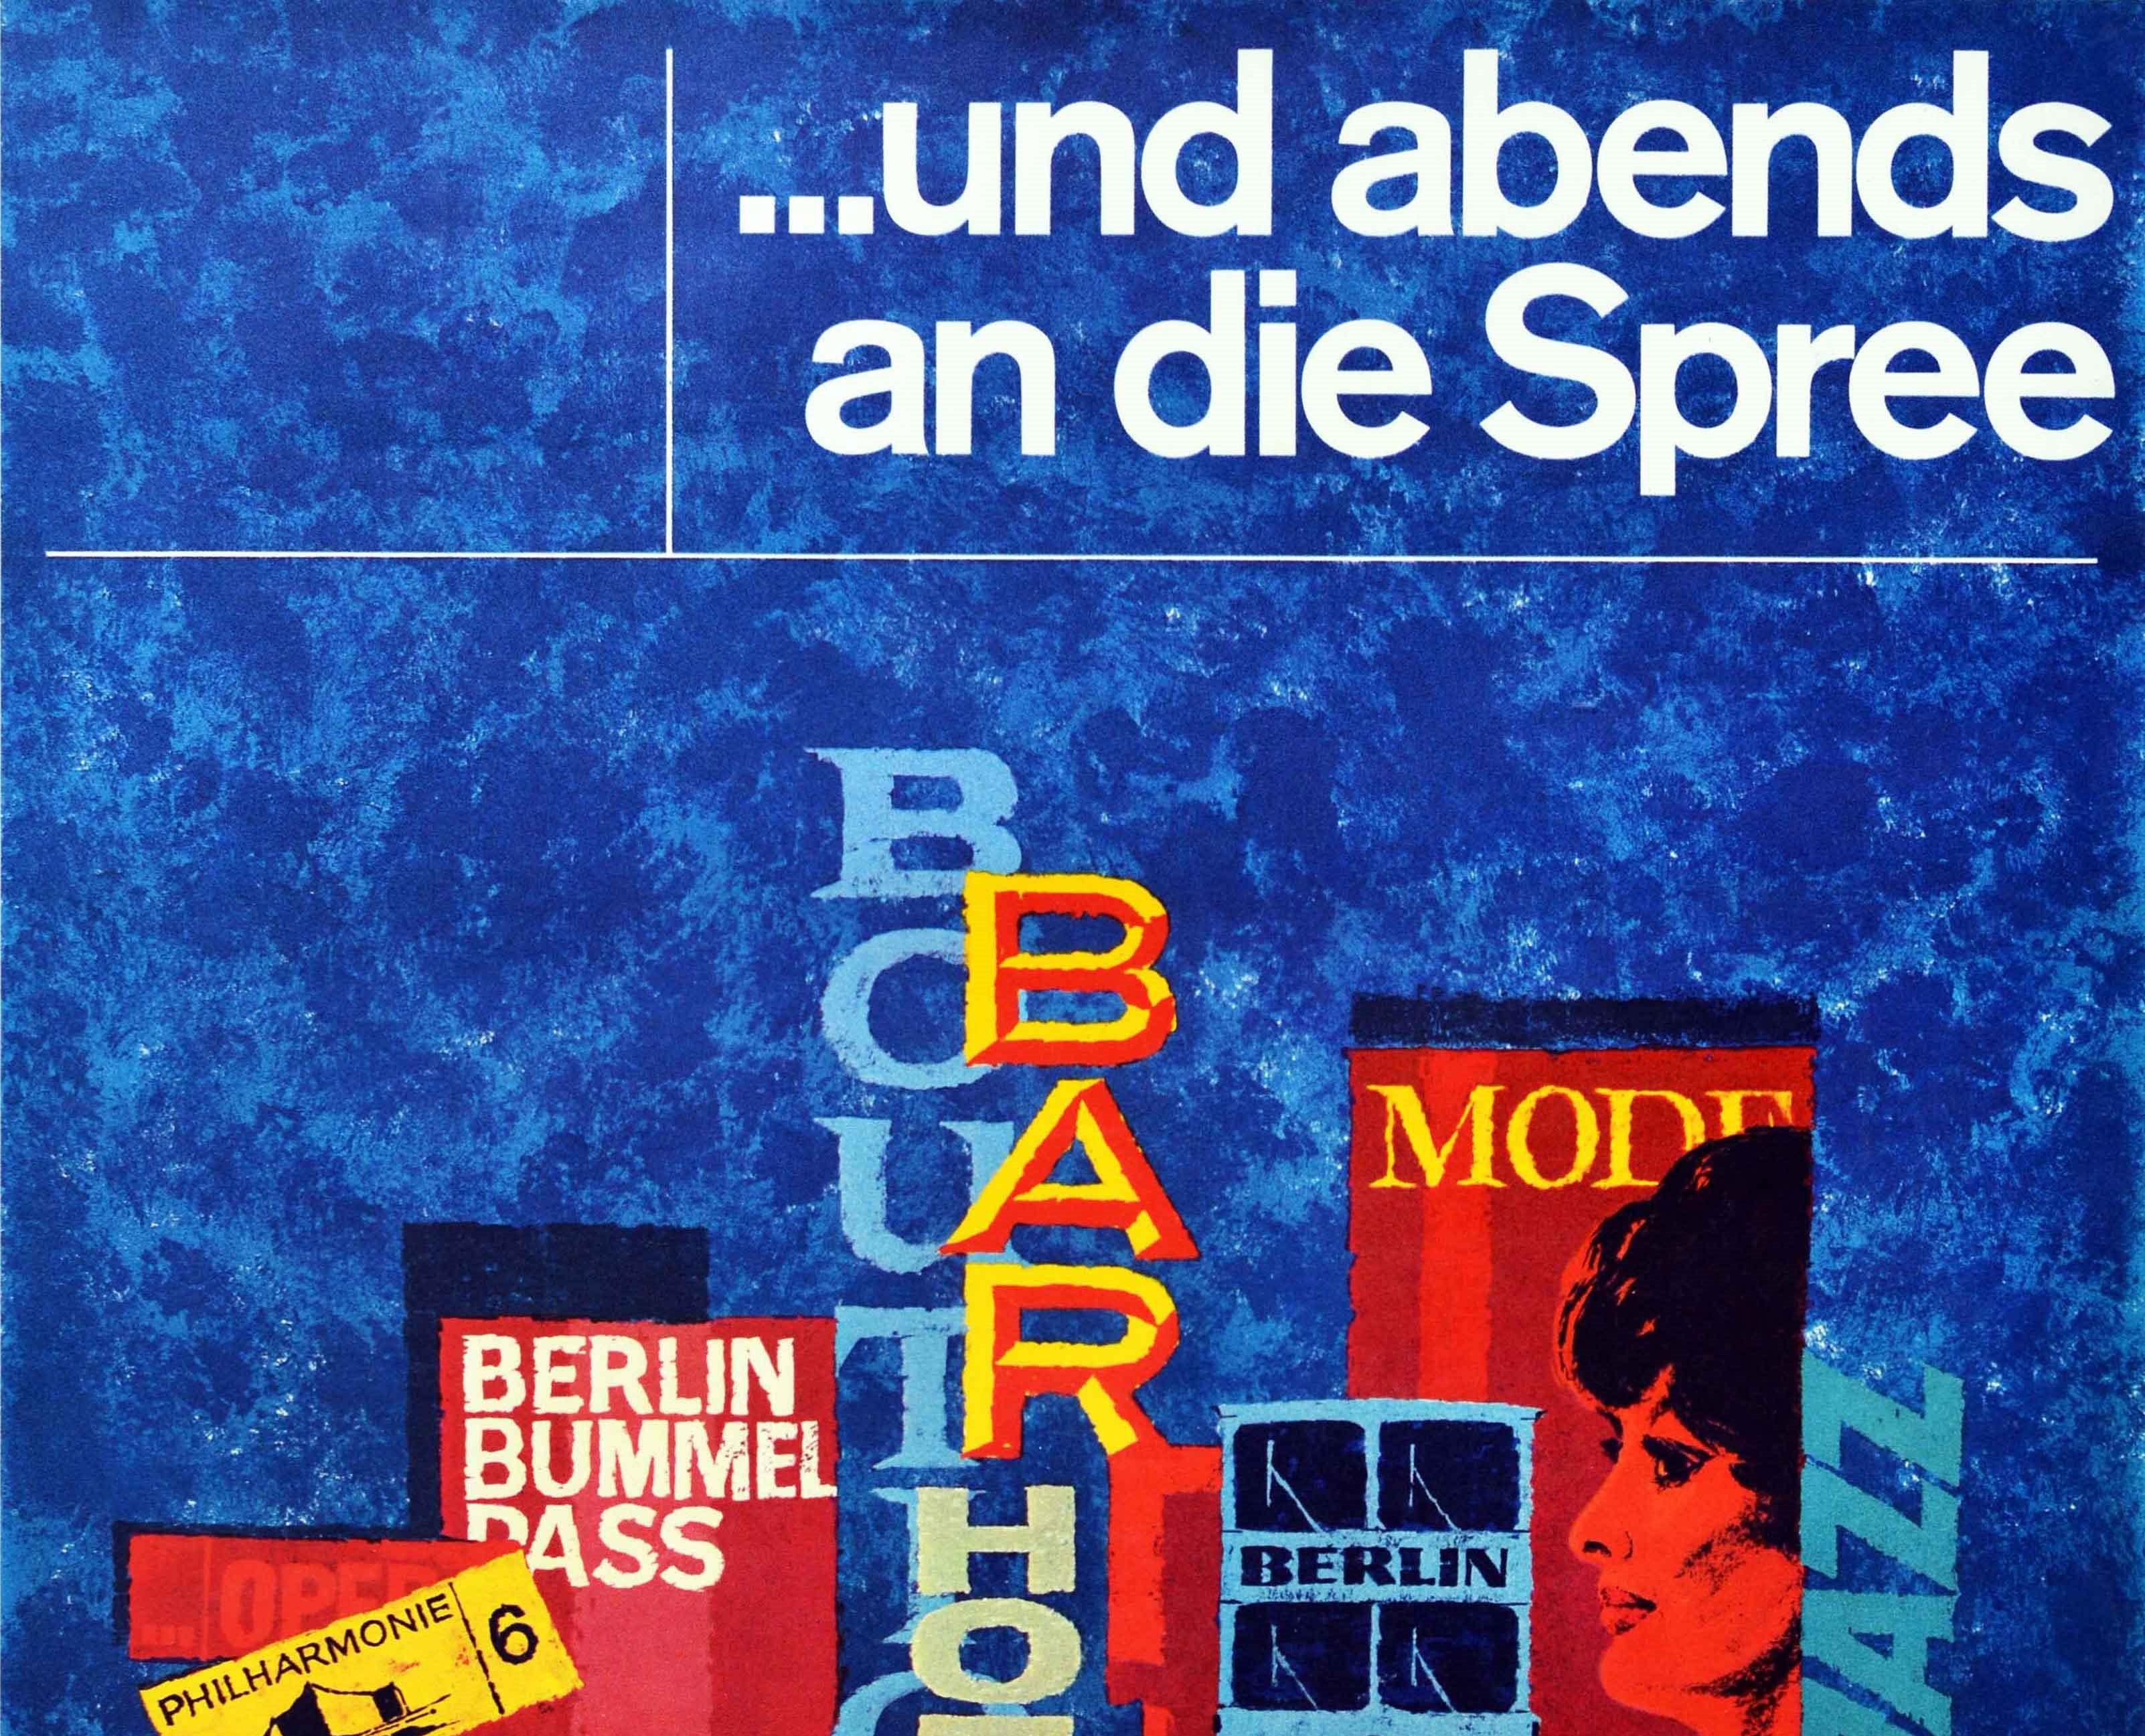 Original vintage travel poster promoting Berlin - und abends an die Spree / and an evening on the River Spree - featuring a colourful design with a montage of words in different fonts and colours reading Bar Hotel Beat Cafe Boutique Theater Jazz